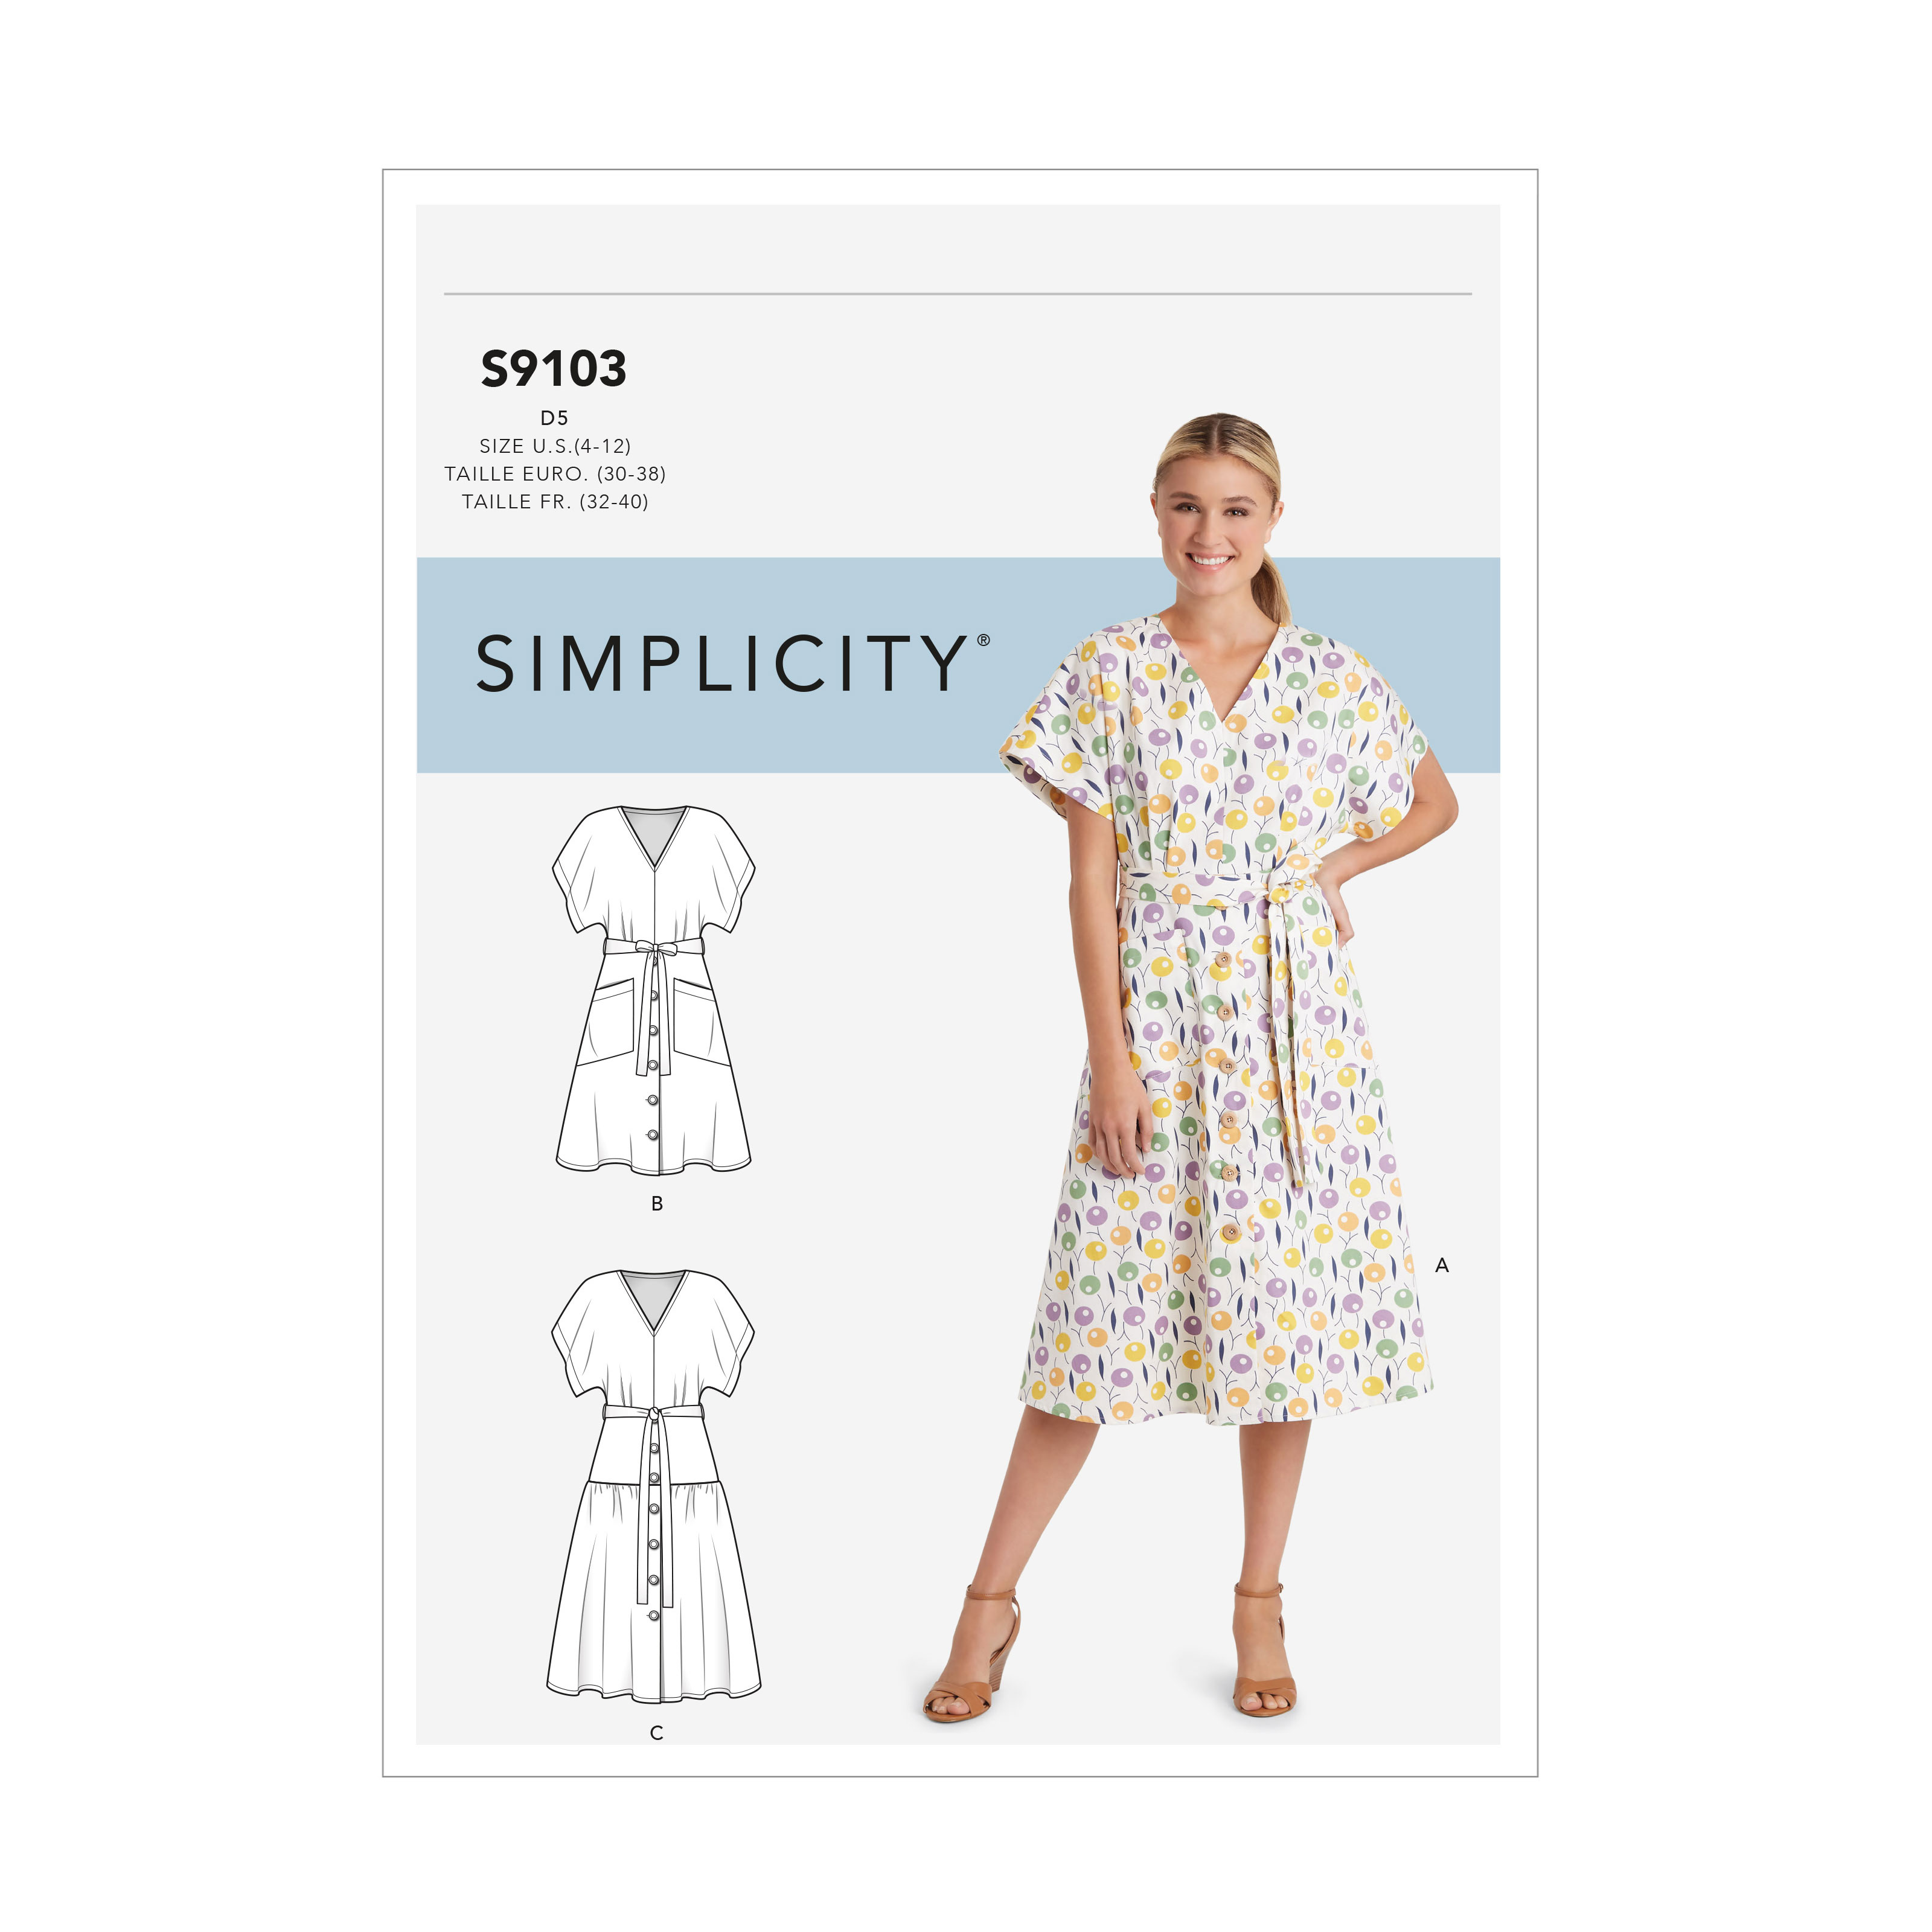 Hospital Gown Open Back Simplicity Sewing Pattern R11311 LXXL Adaptive  Unisex  eBay